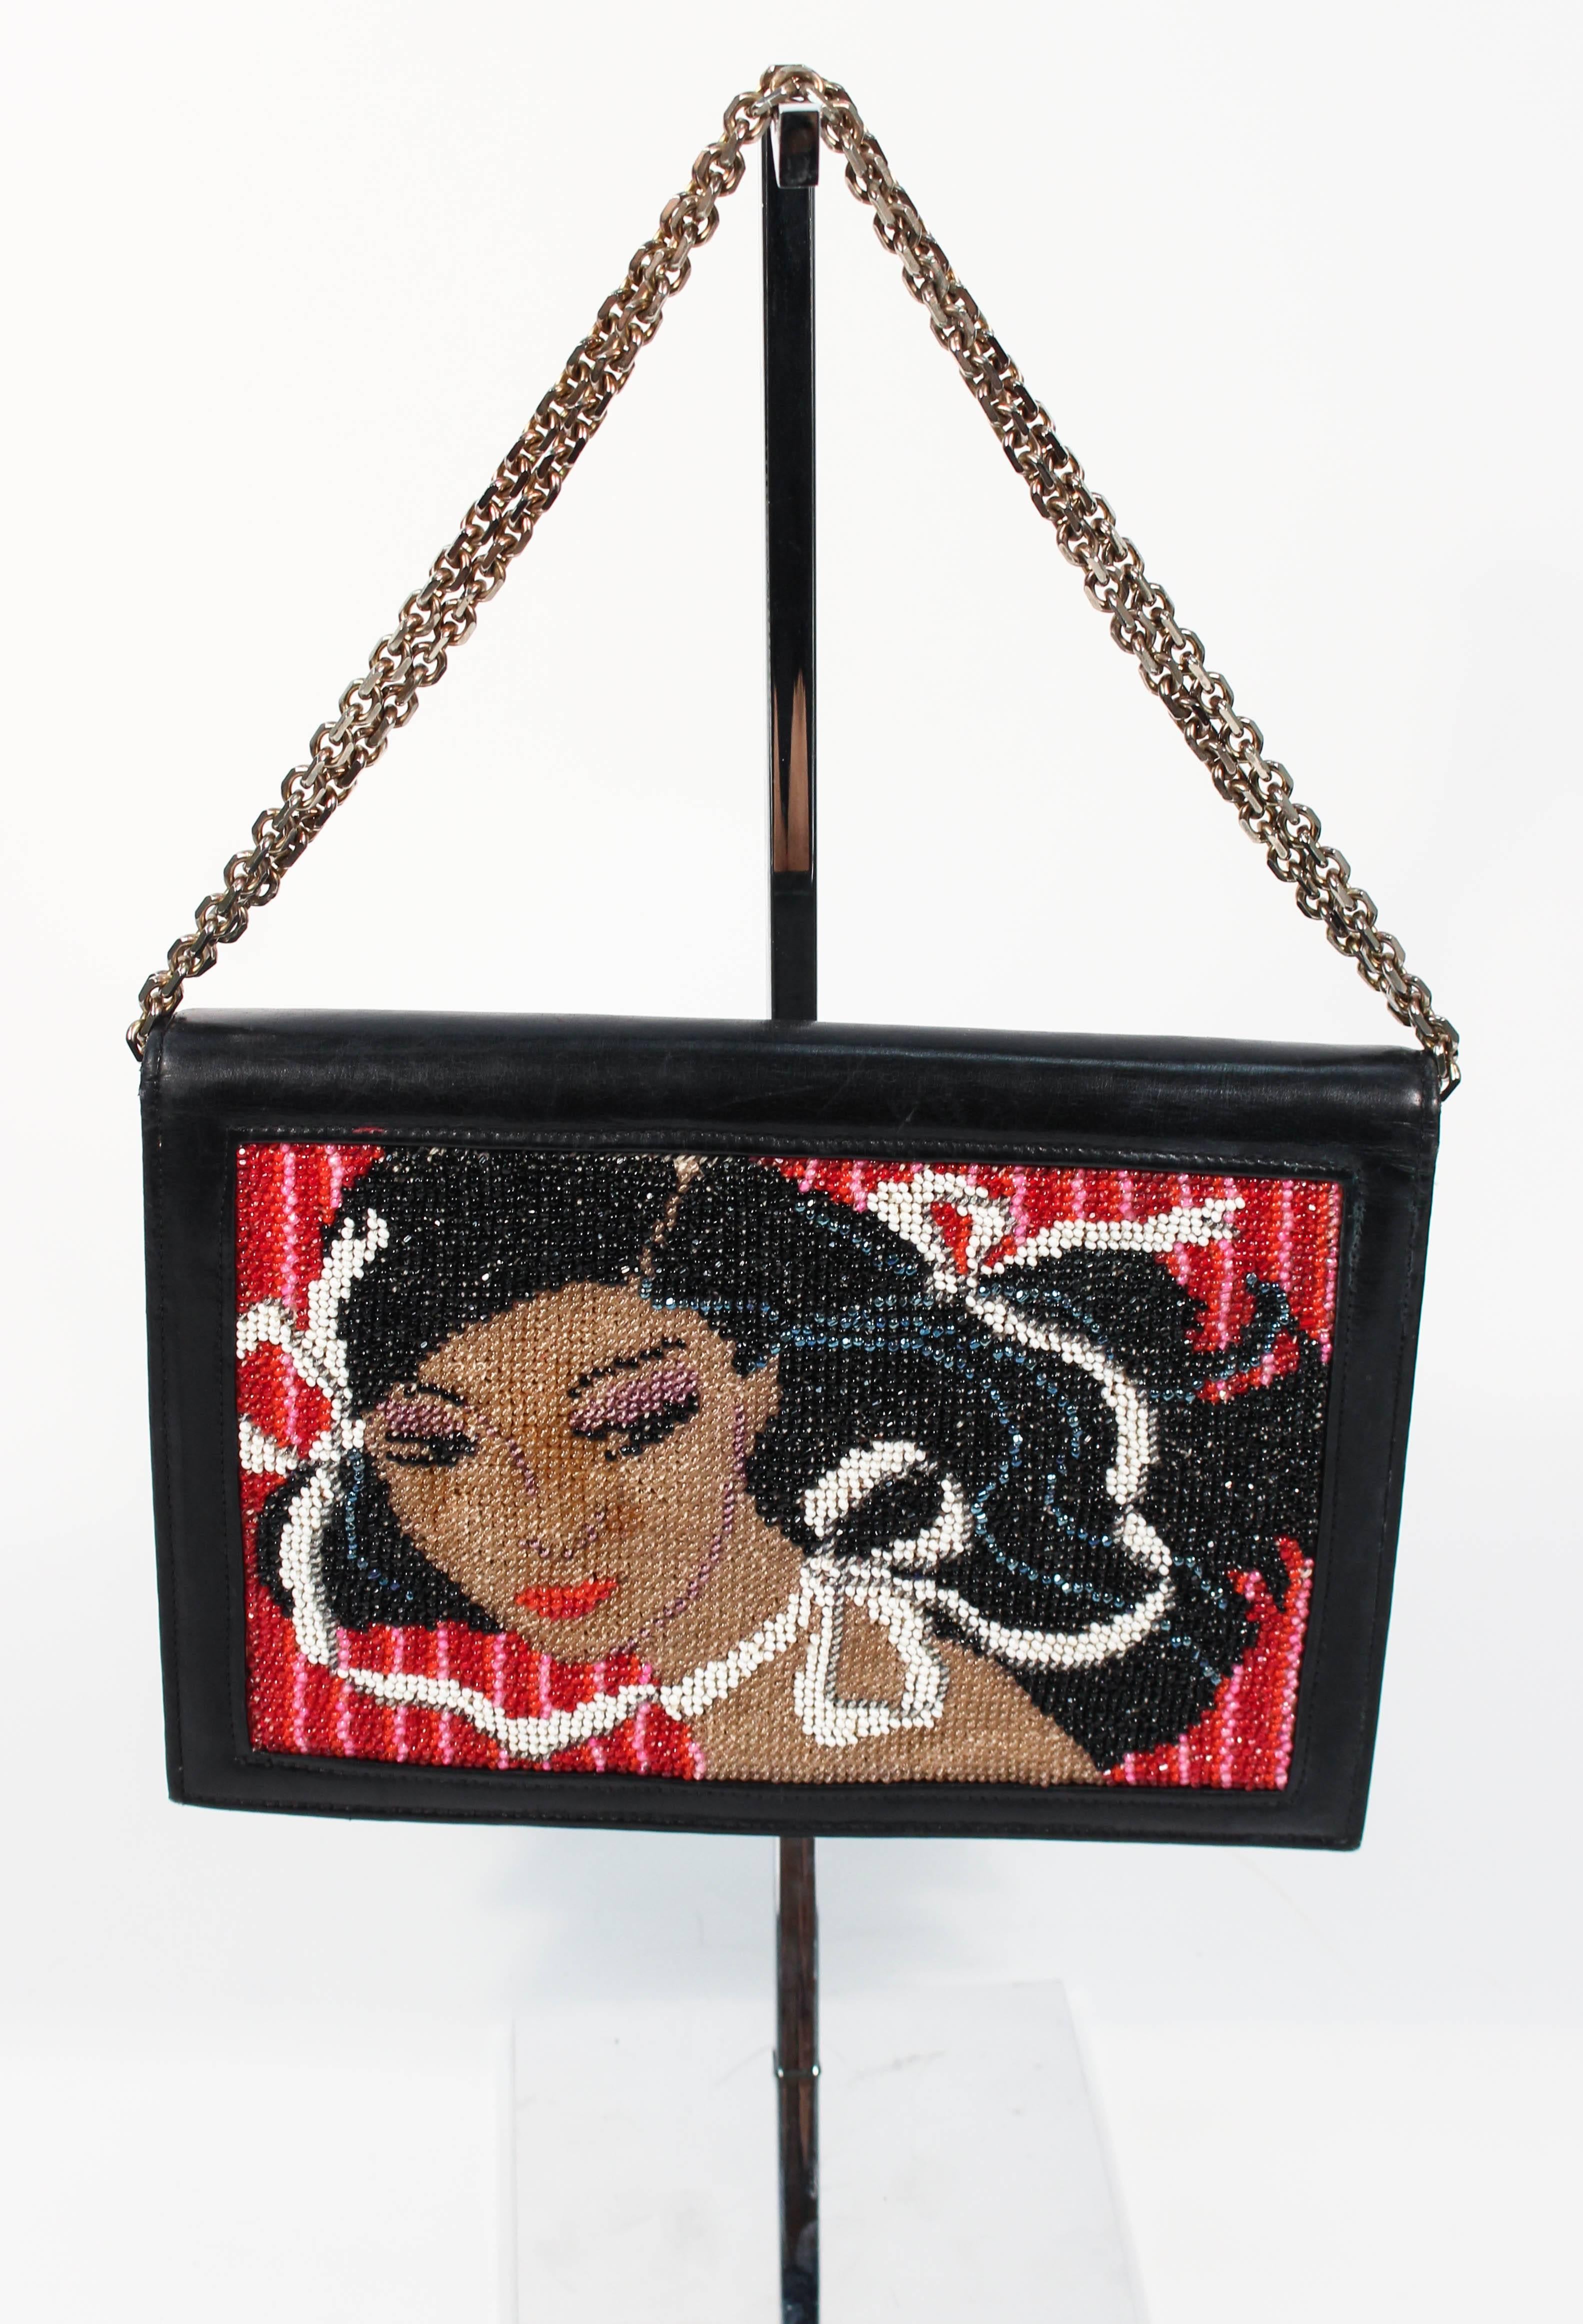 This vintage purse features a stunning beaded design with a black patent leather exterior. Features interior silk lining and an optional chain strap, which can be doubled or used single strand. The purse is in excellent condition consistent with age